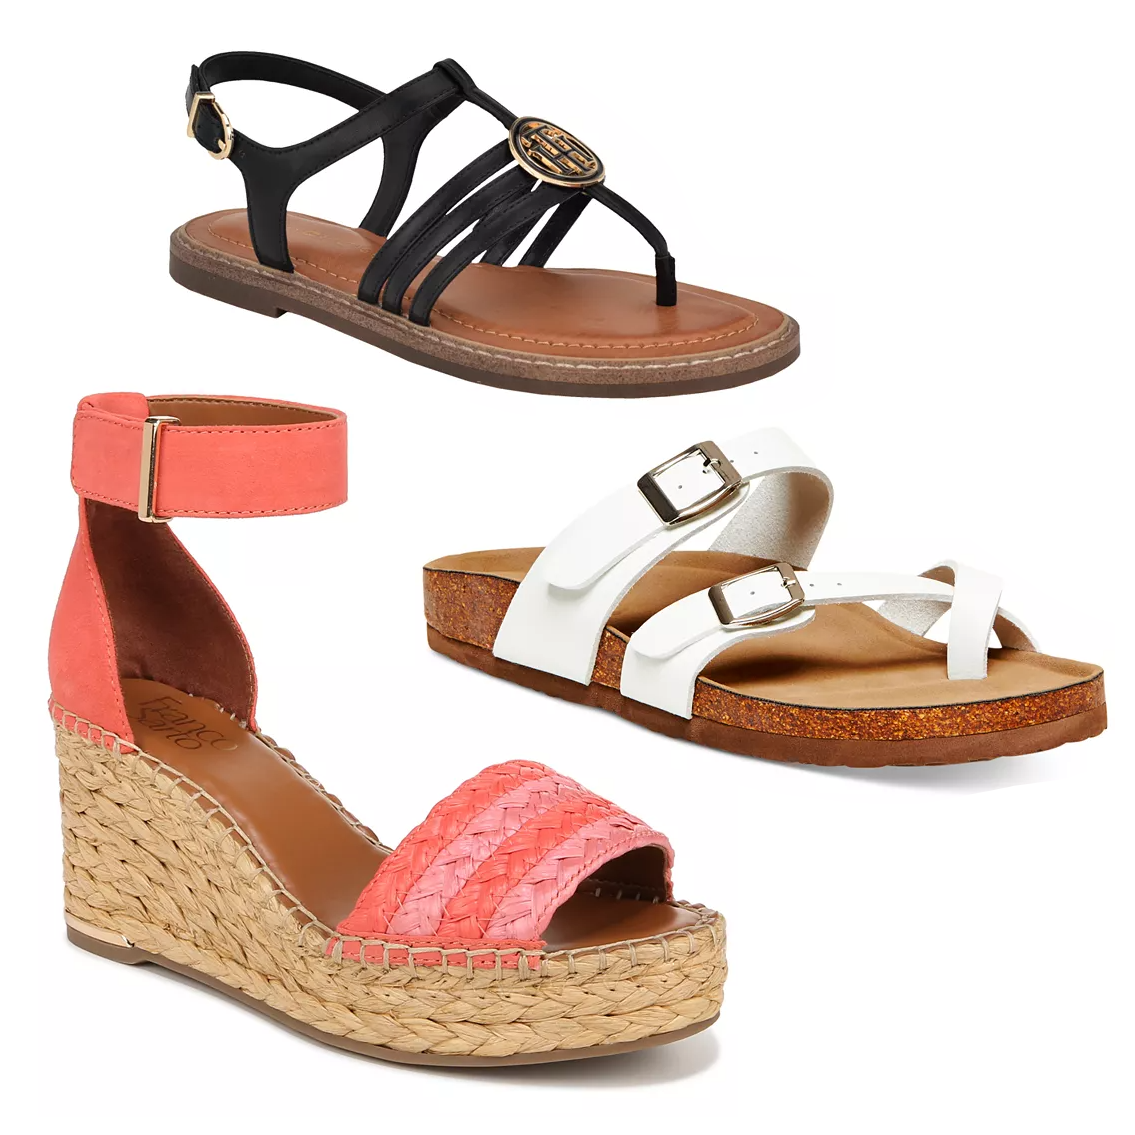 Three different styles of women's sandals: a black T-strap with a circular emblem, a white two-strap with buckles, and a coral woven wedge heel.